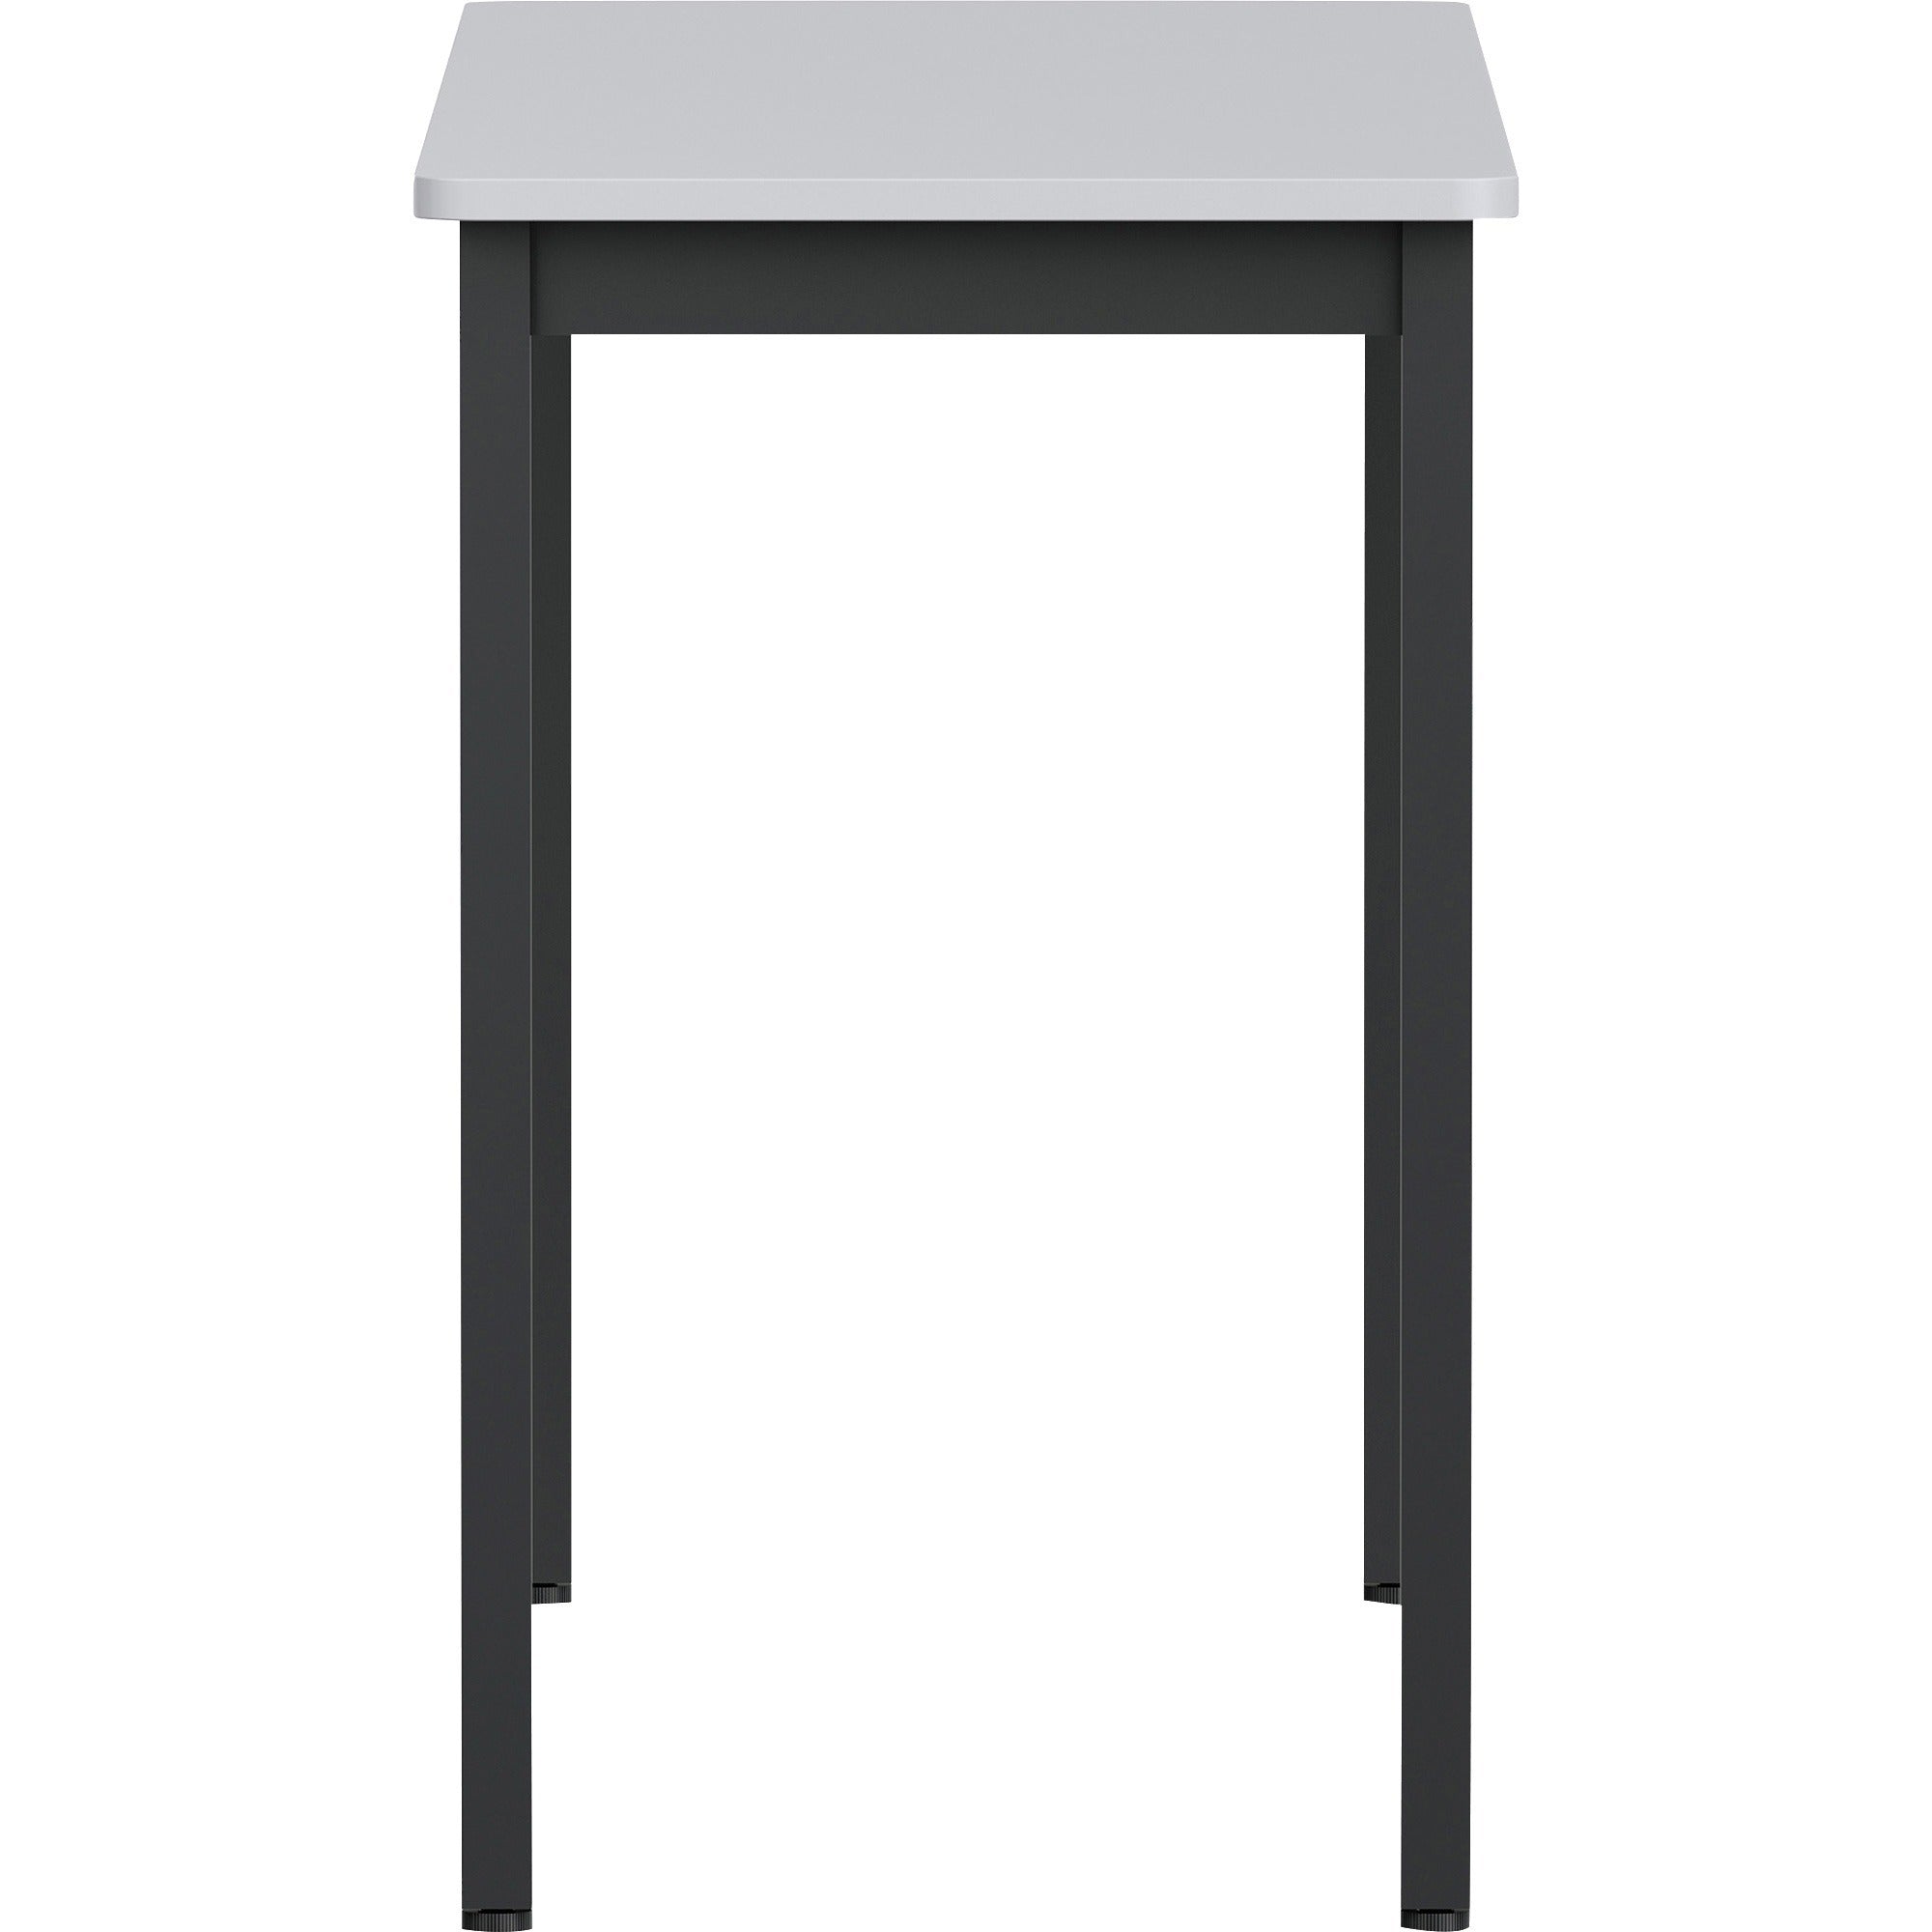 lorell-utility-table-for-table-topgray-rectangle-laminated-top-powder-coated-black-base-500-lb-capacity-x-5988-table-top-width-x-1813-table-top-depth-30-height-assembly-required-melamine-top-material-1-each_llr60754 - 4